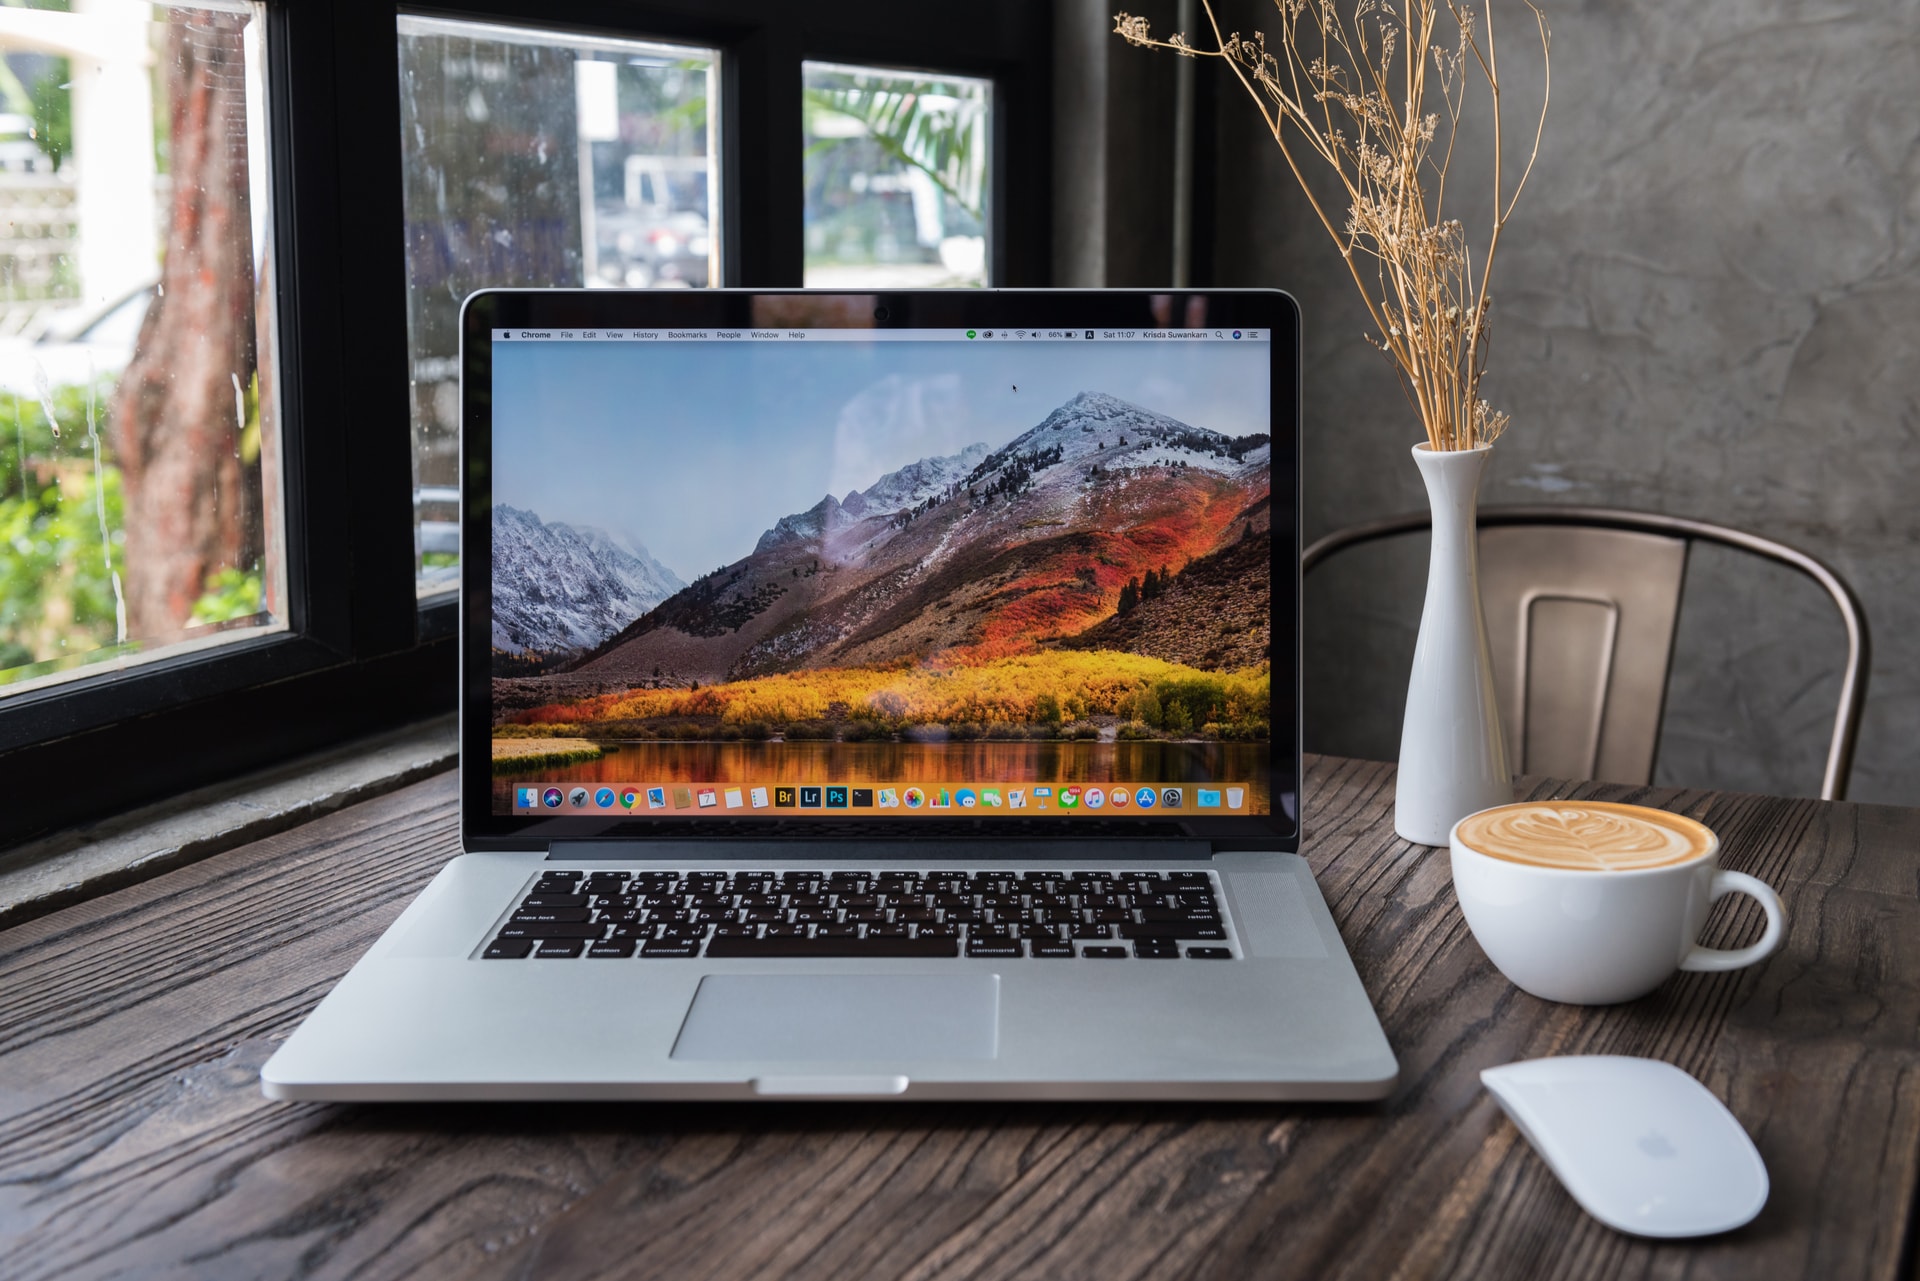 Troubleshooting Graphics And Display Issues On Your Mac